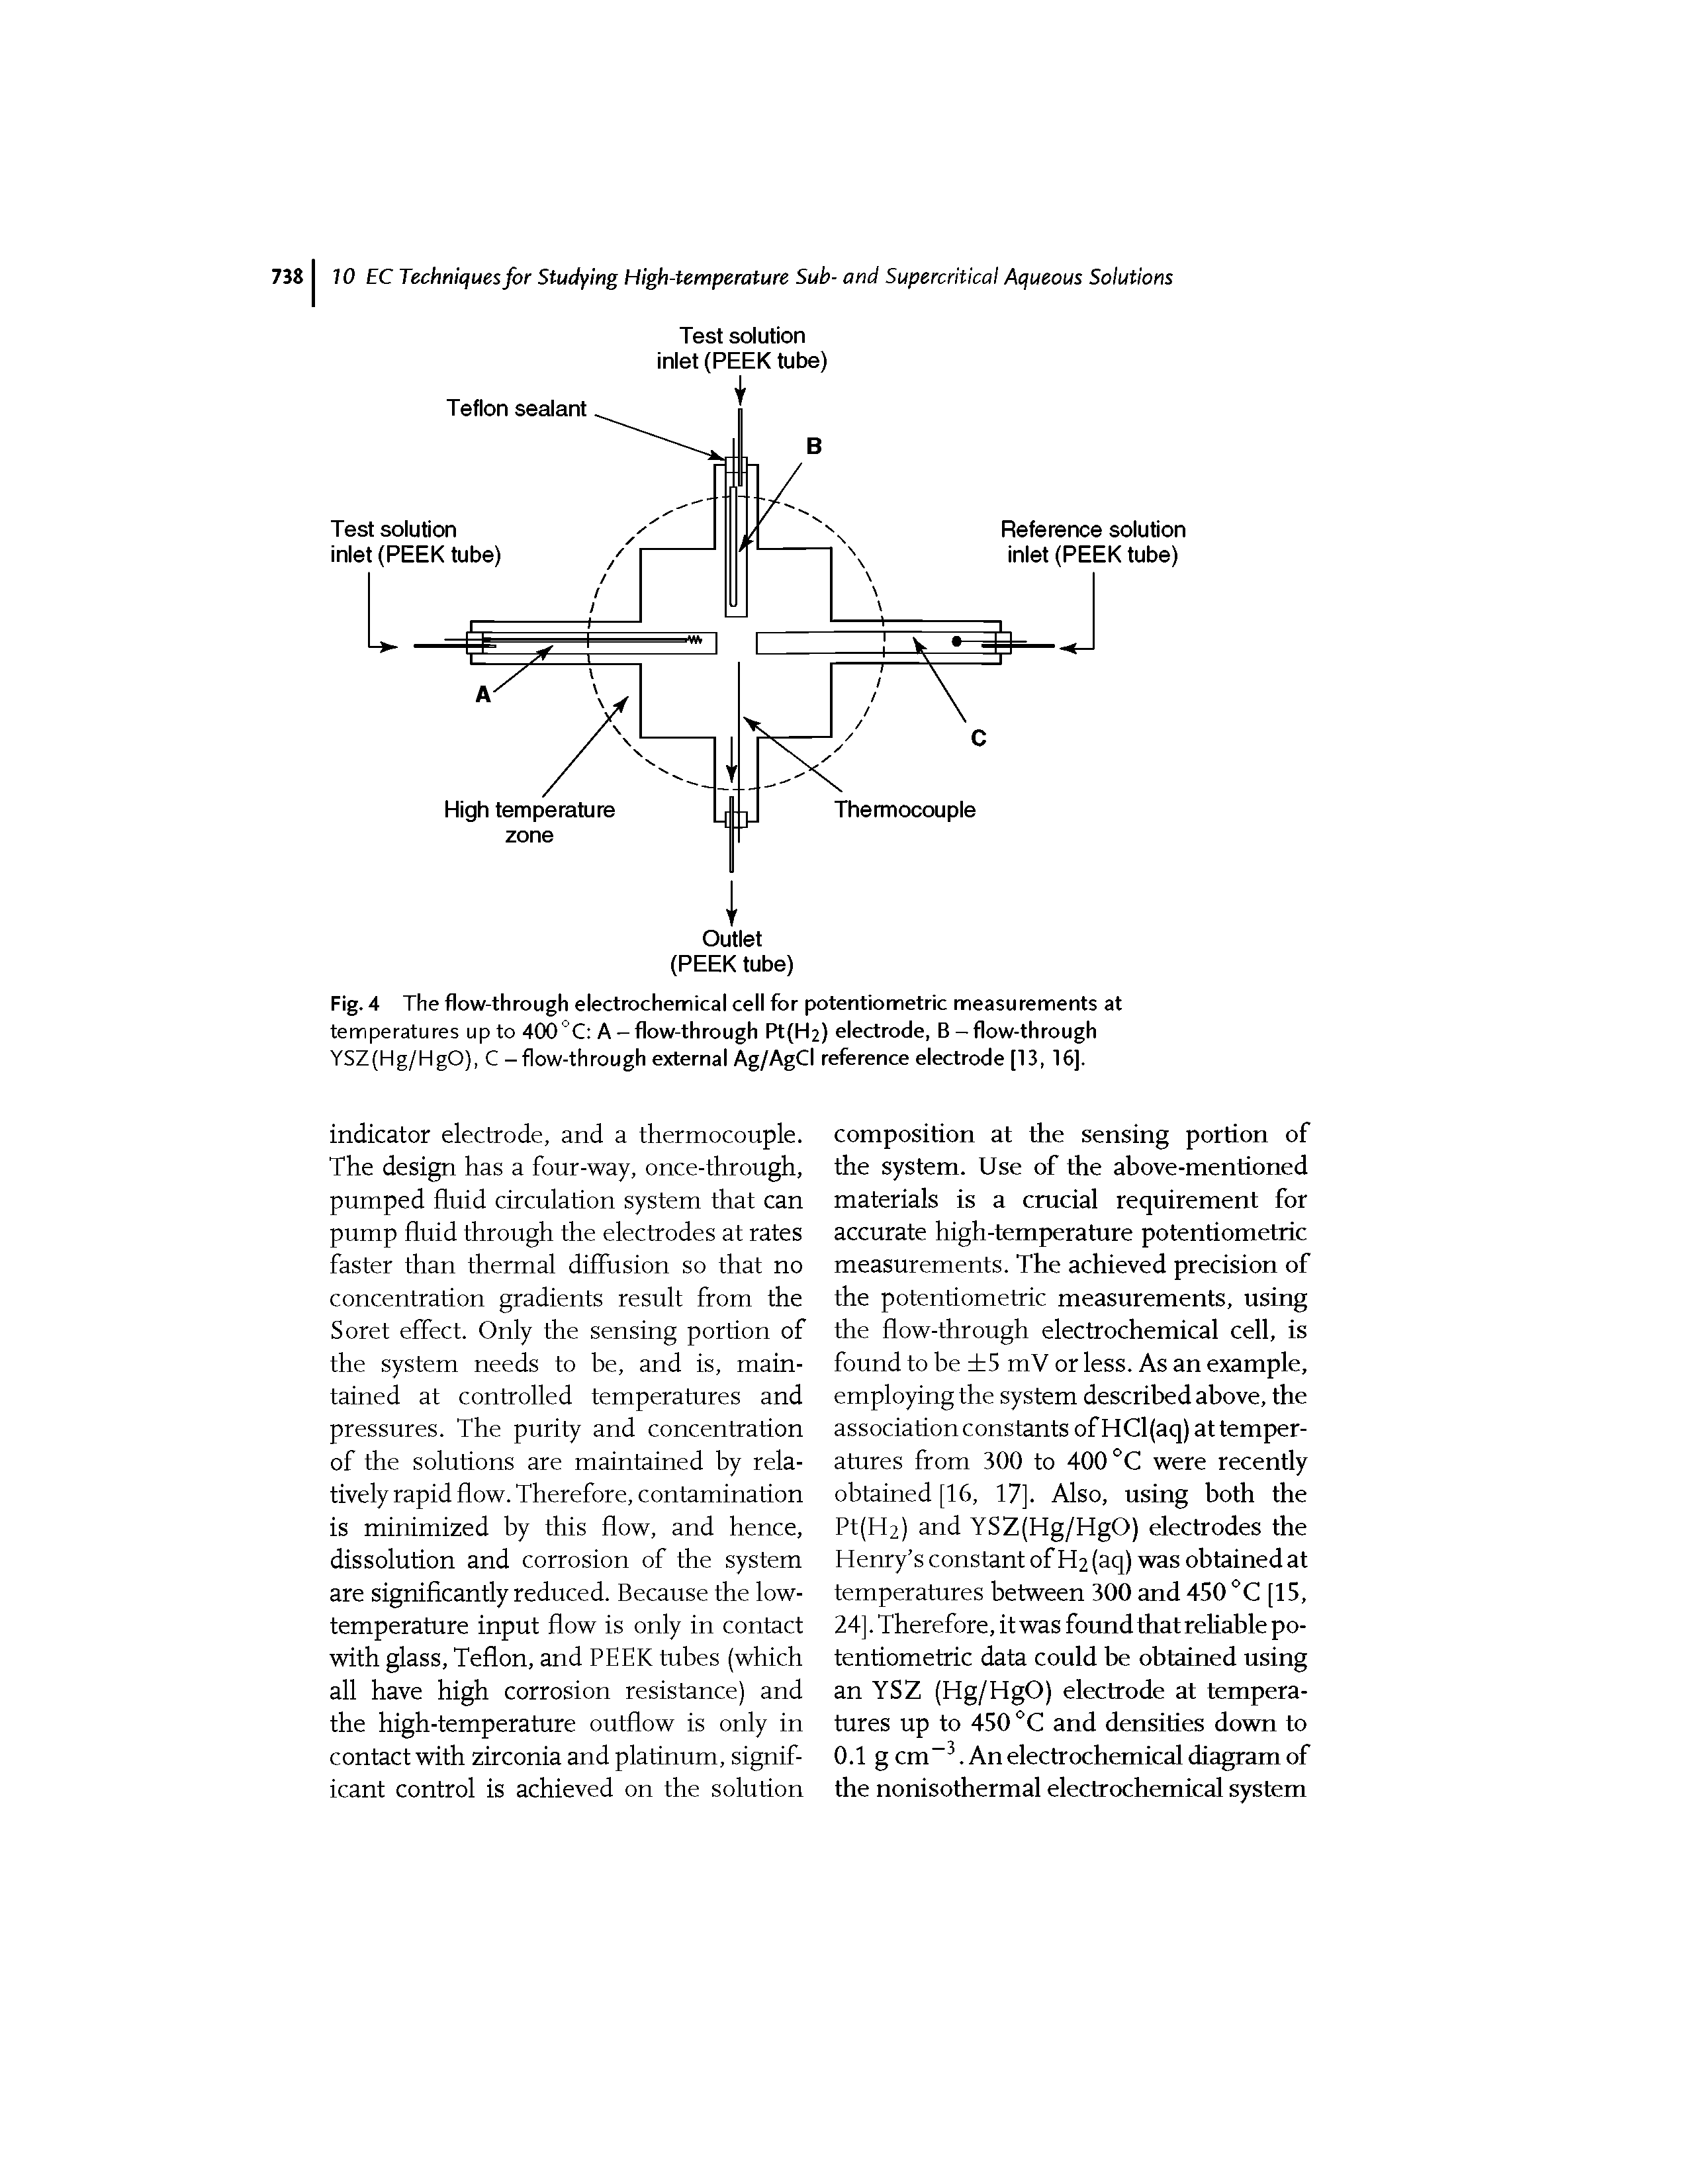 Fig. 4 The flow-through electrochemical cell for potentiometric measurements at temperatures up to 400°C A - flow-through Ptfhh) electrode, B - flow-through YSZ(Hg/HgO), C -flow-through external Ag/AgCl reference electrode [13, 16].